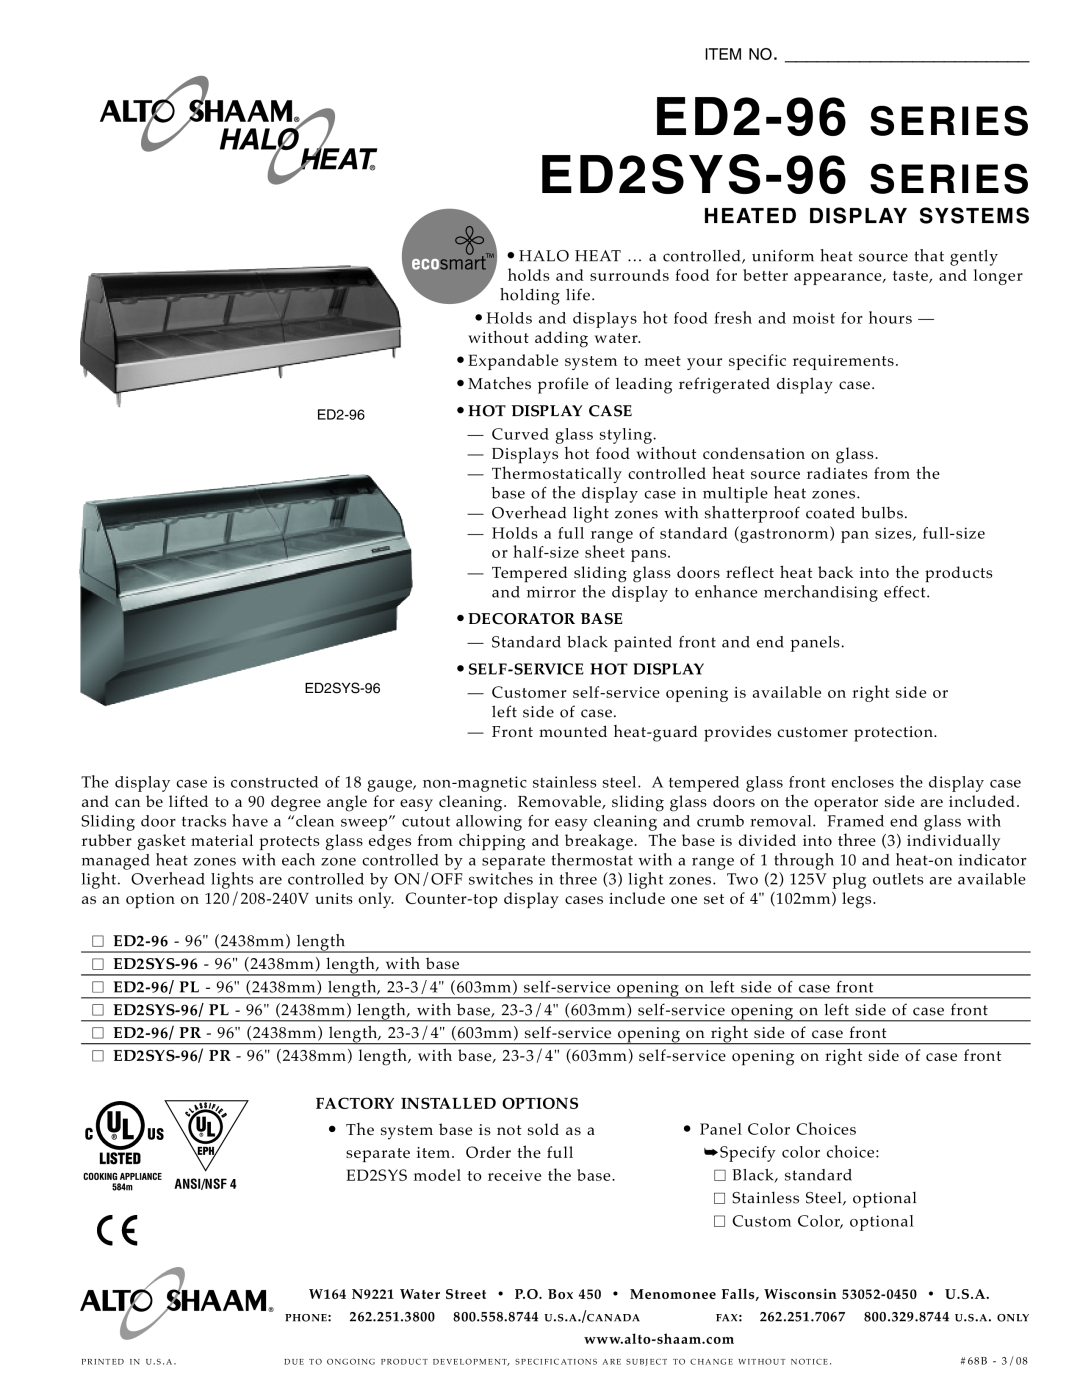 Alto-Shaam ED2SYS-96, ED2-96 SERIES specifications Heated Display Syste Ms, ED2 -96 SERIES ED2S YS-96 SERIES, Item No 